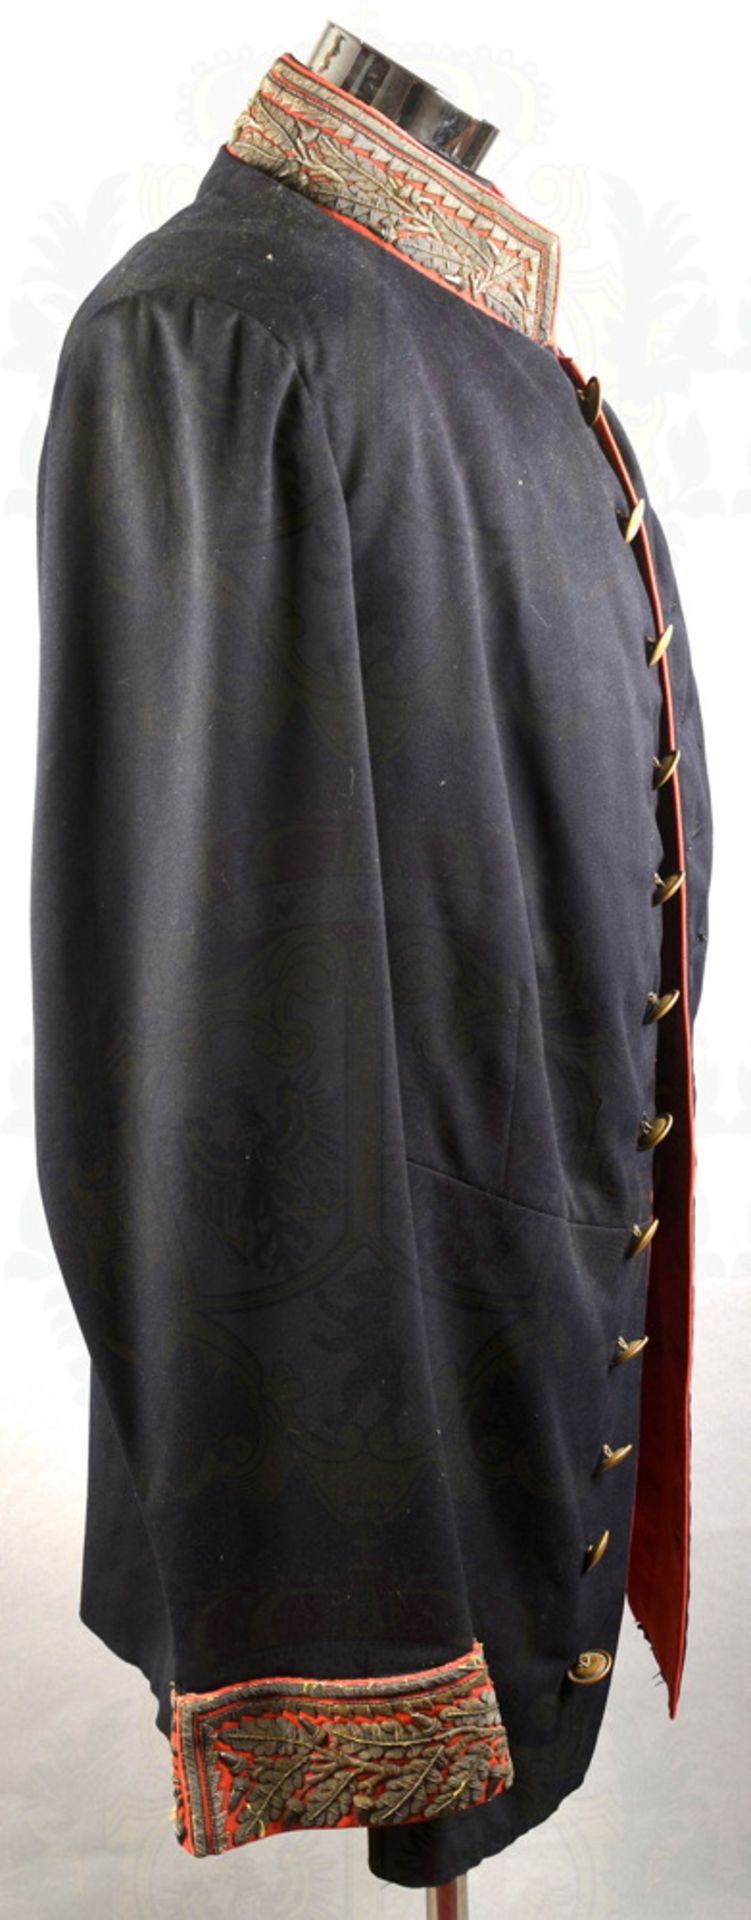 Parade tunic for Prussian generals - Image 2 of 7